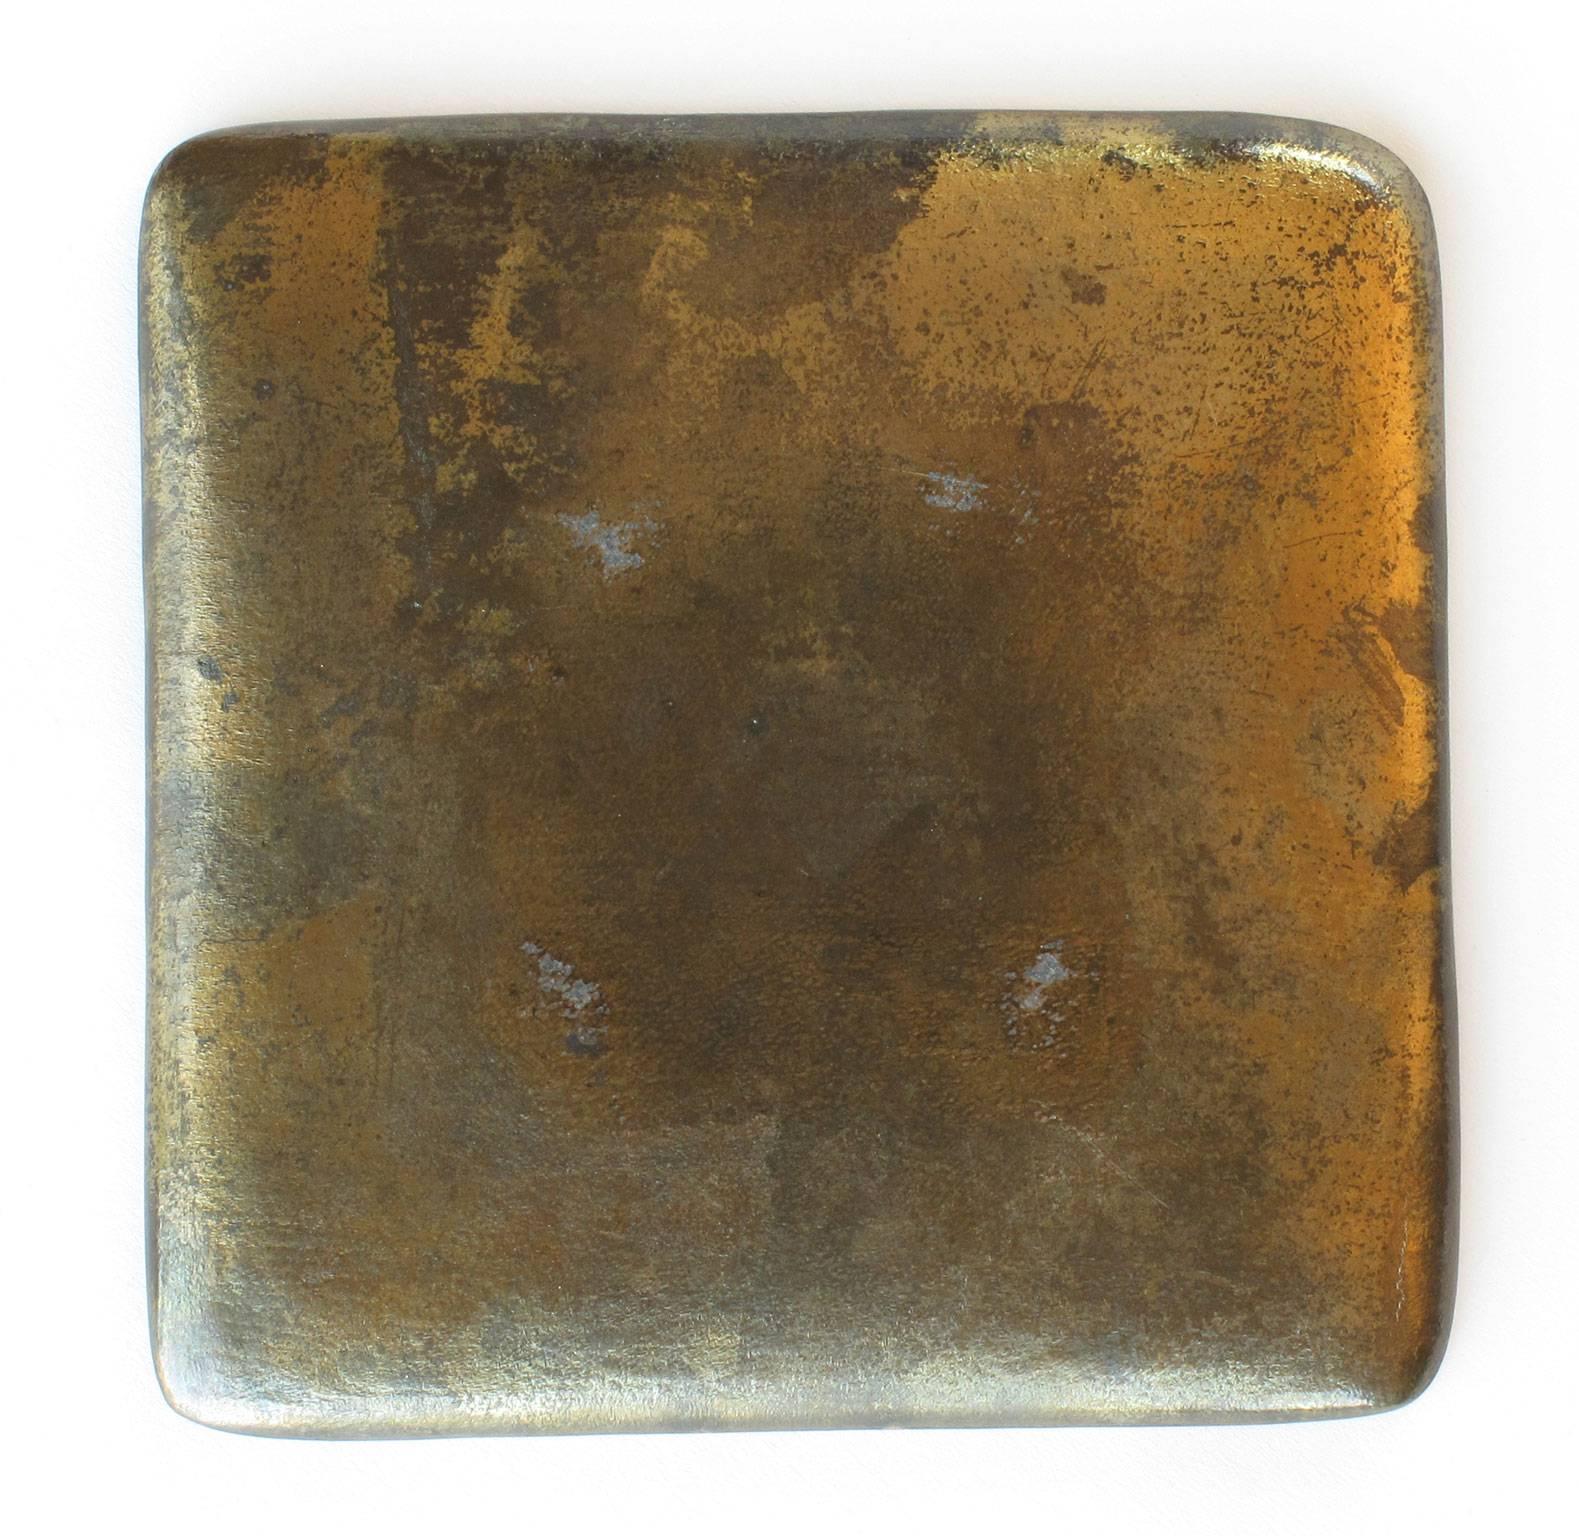 Ben Seibel Square Shaped Brass Tray with Concentric Squares Design Jenfred Ware For Sale 1